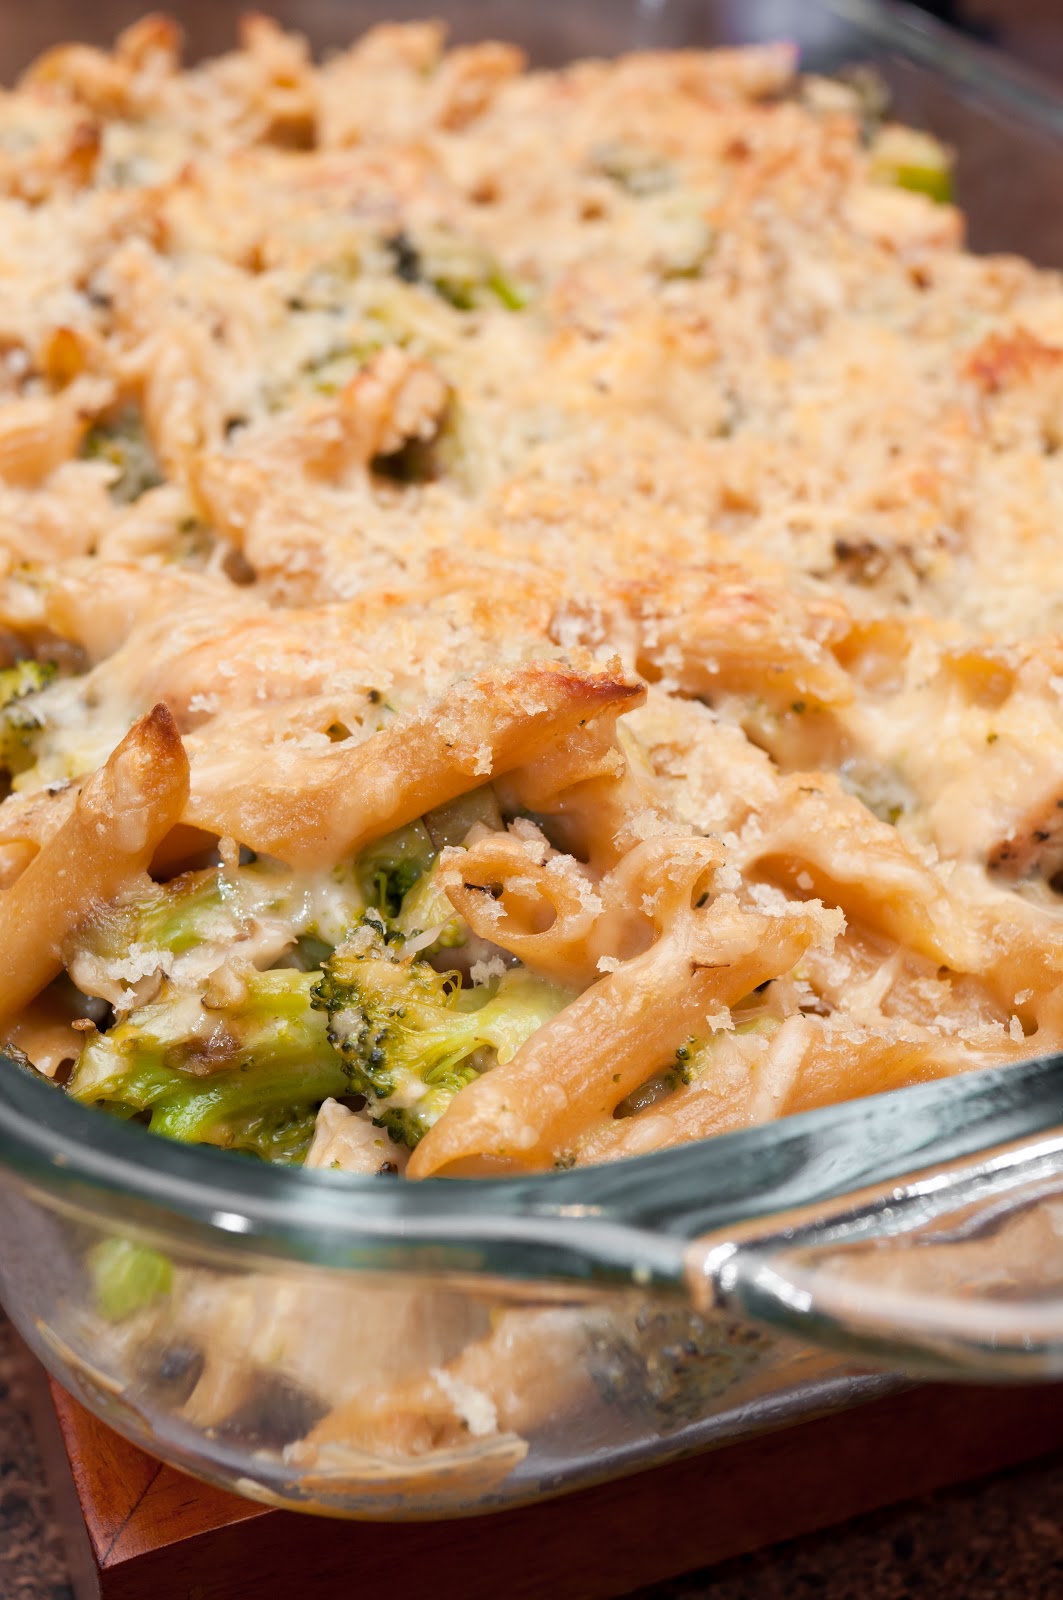 Hedlund Home Cooking: Chicken and Broccoli Noodle Casserole